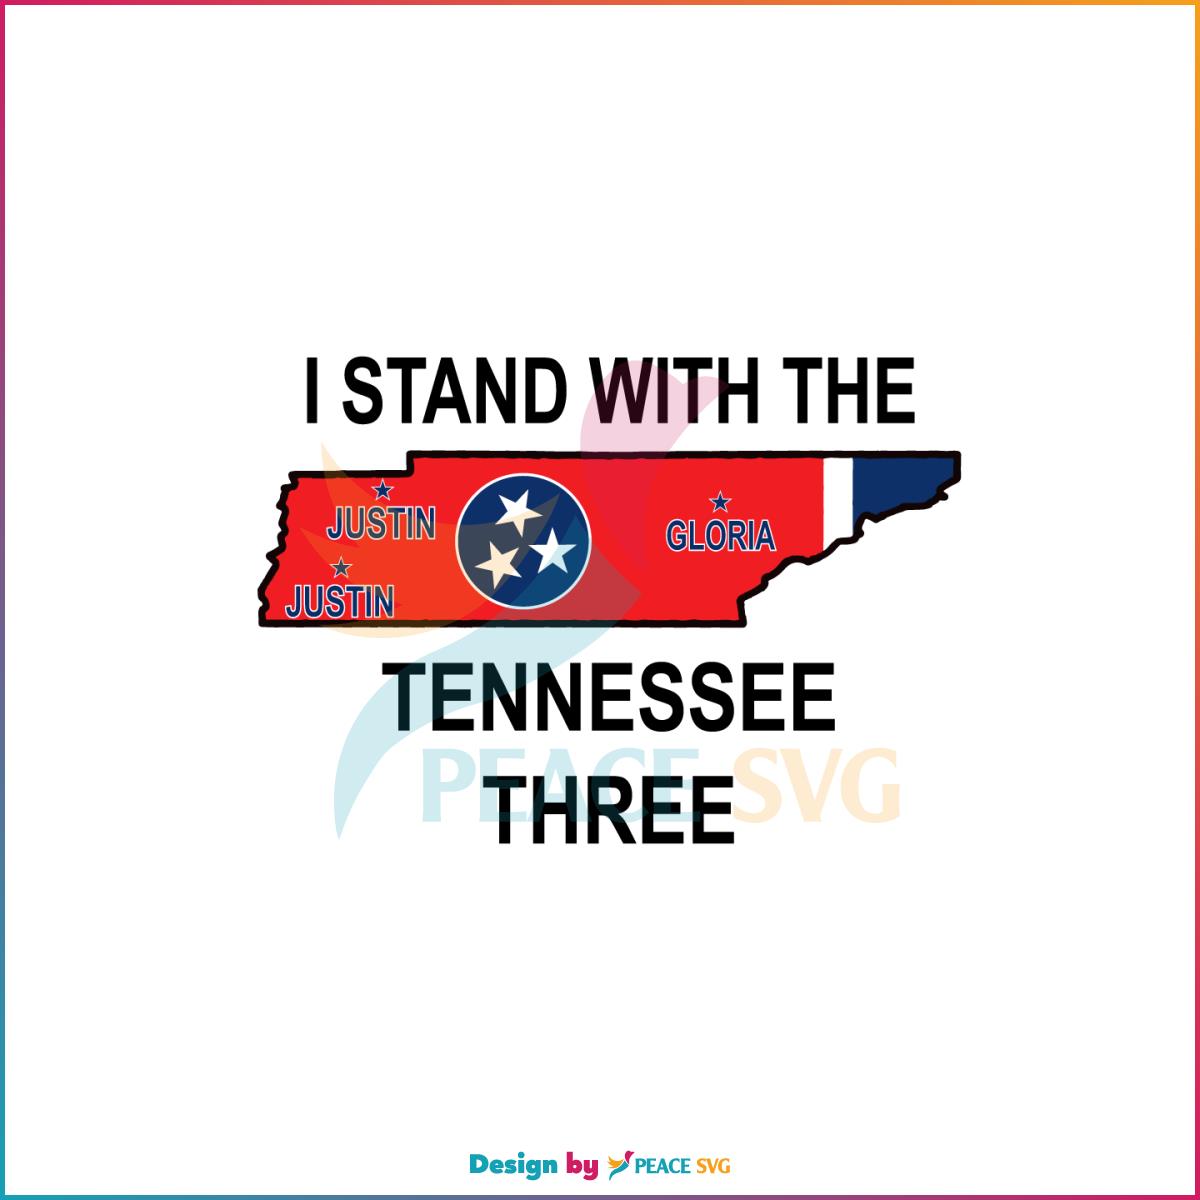 I Stand With The Tennessee Support Tennessee Three SVG Cutting Files